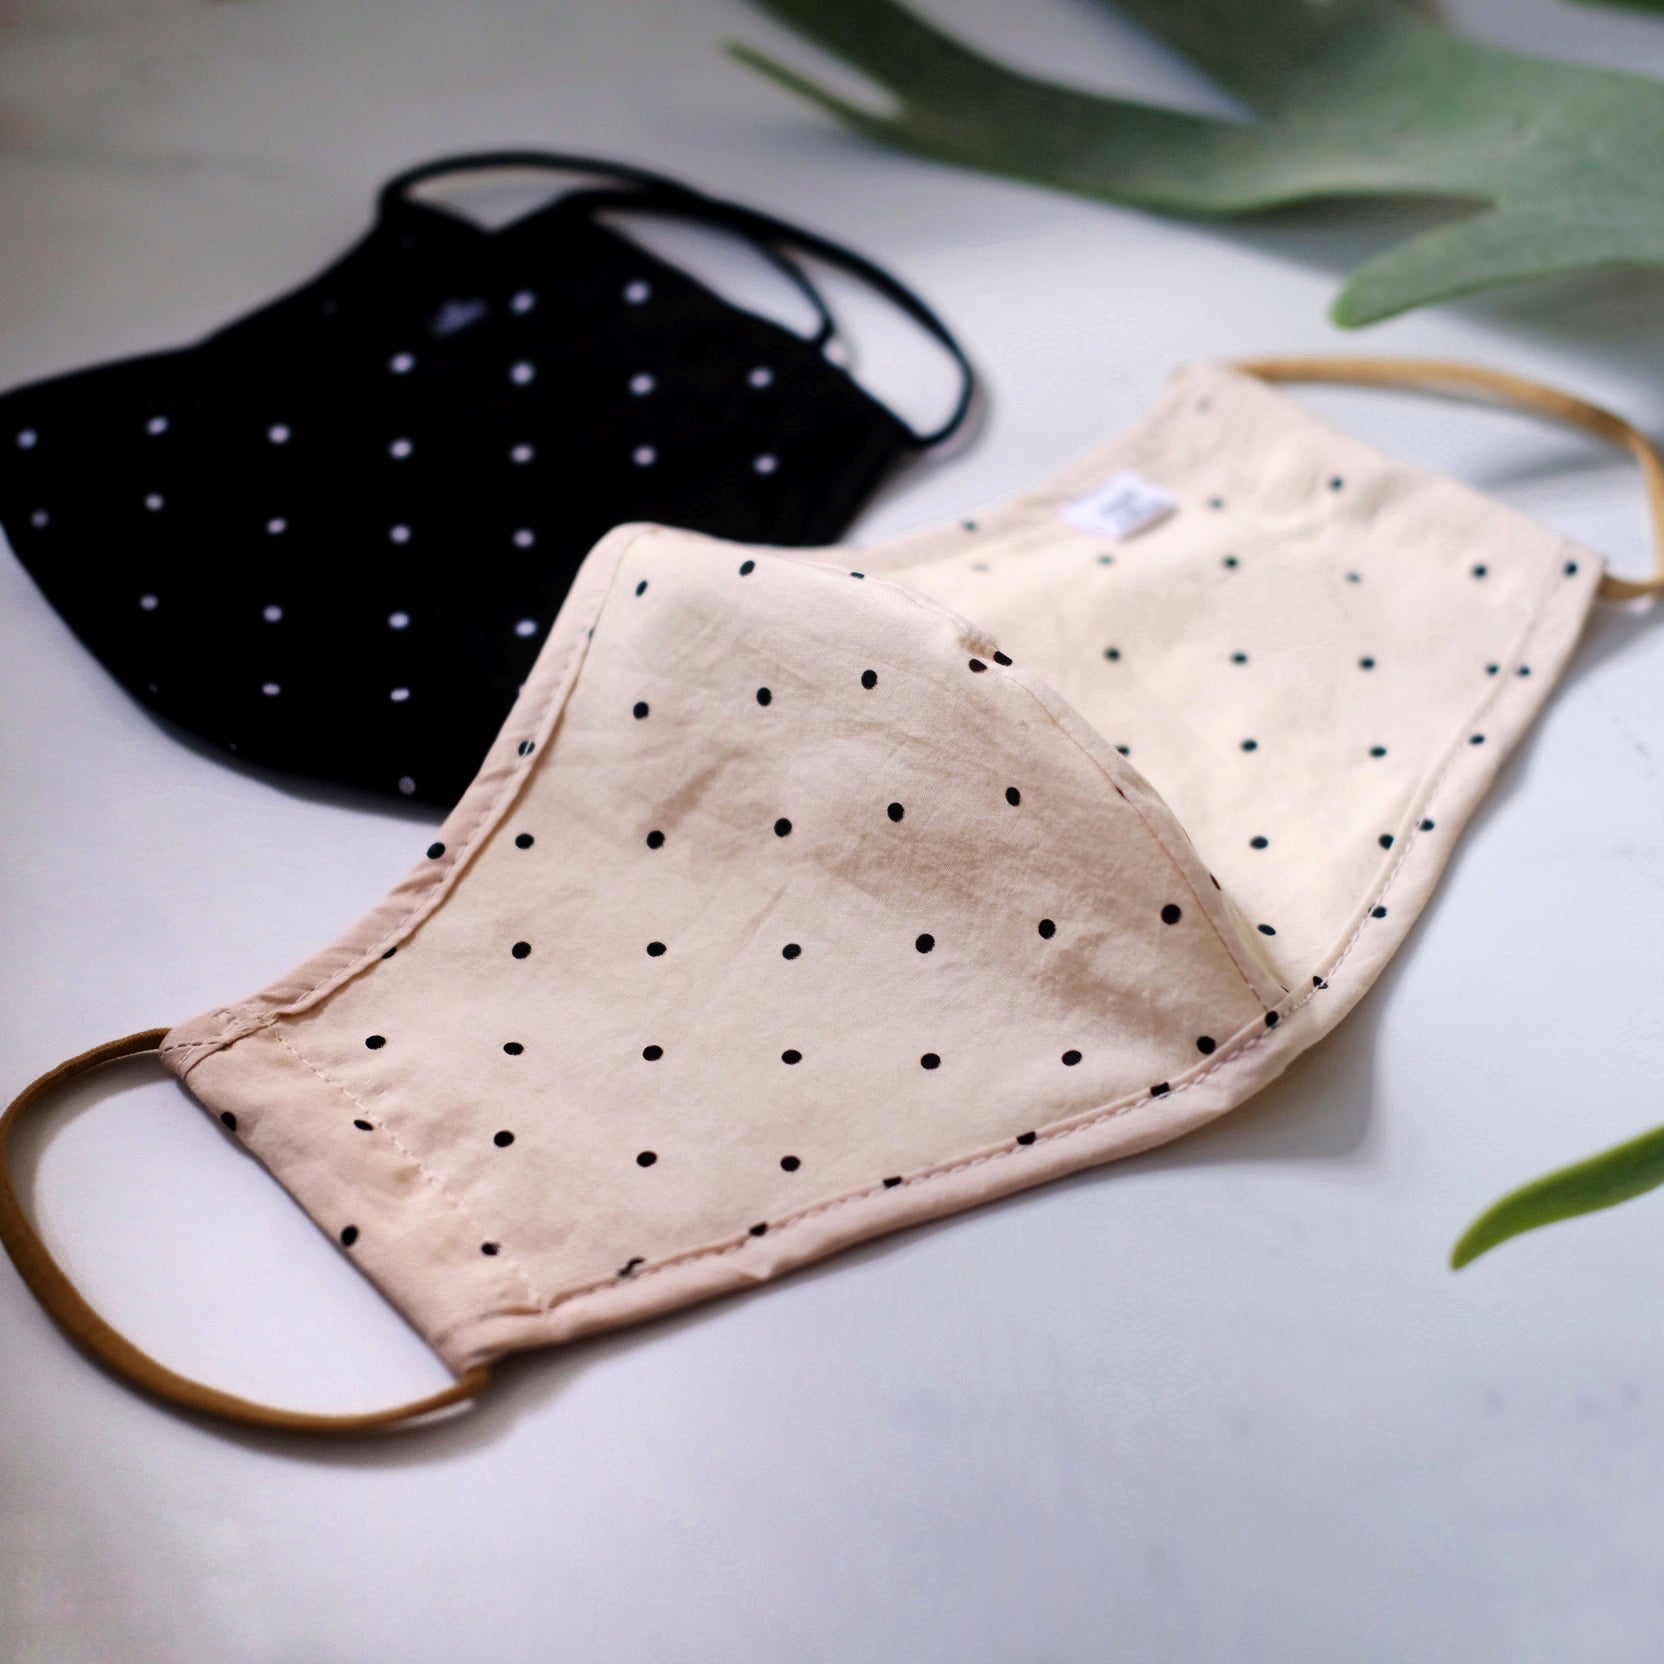 PREORDER Adult Cotton Dot Mask (mid July delivery) - Oh Happy Fry - we ship worldwide